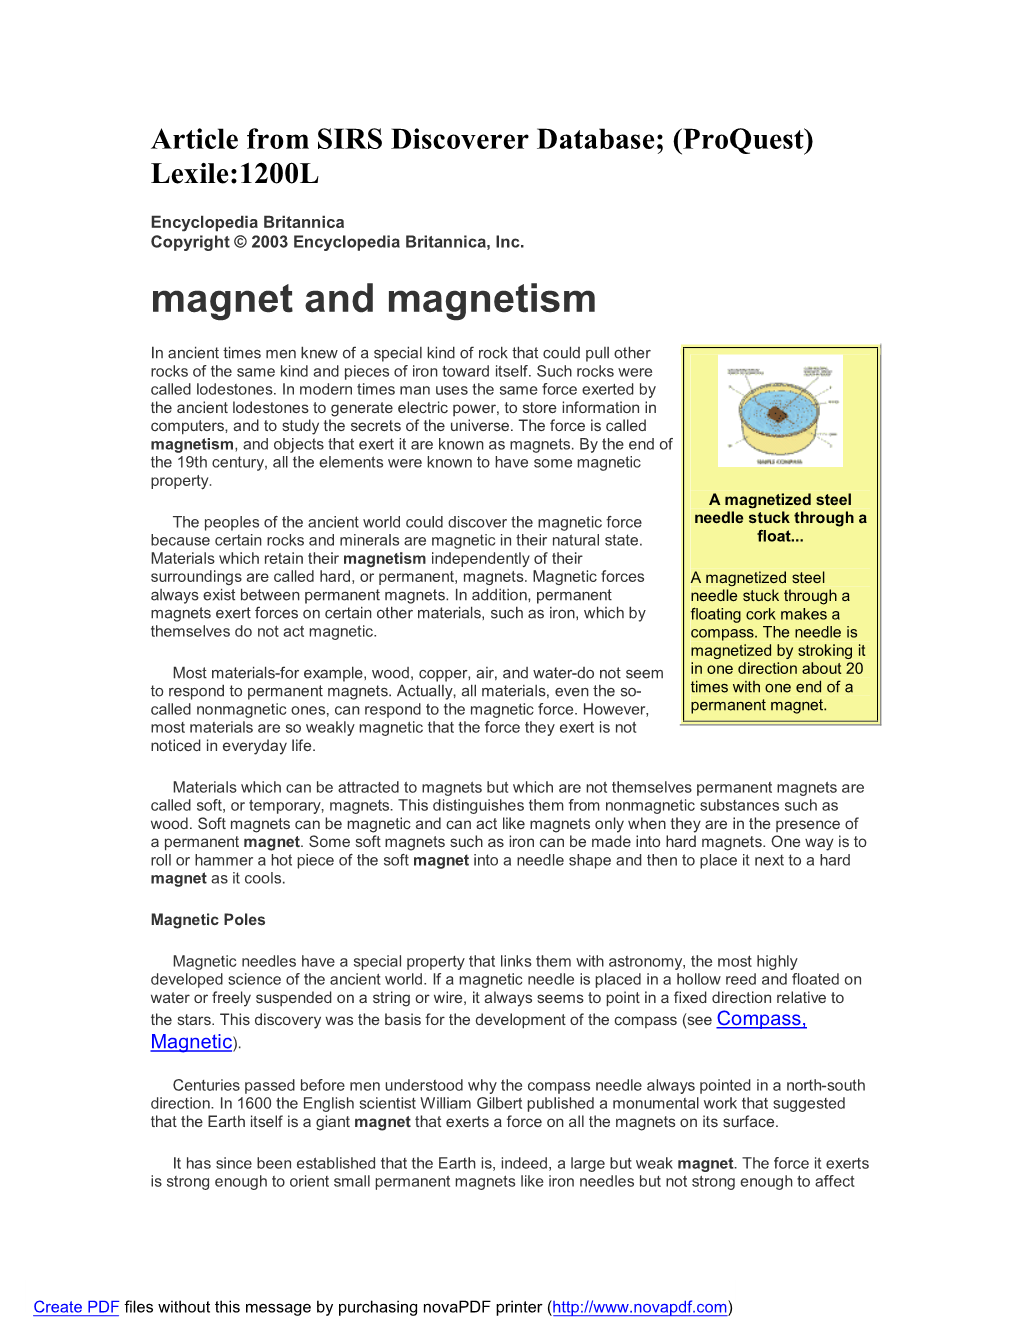 Magnet and Magnetism